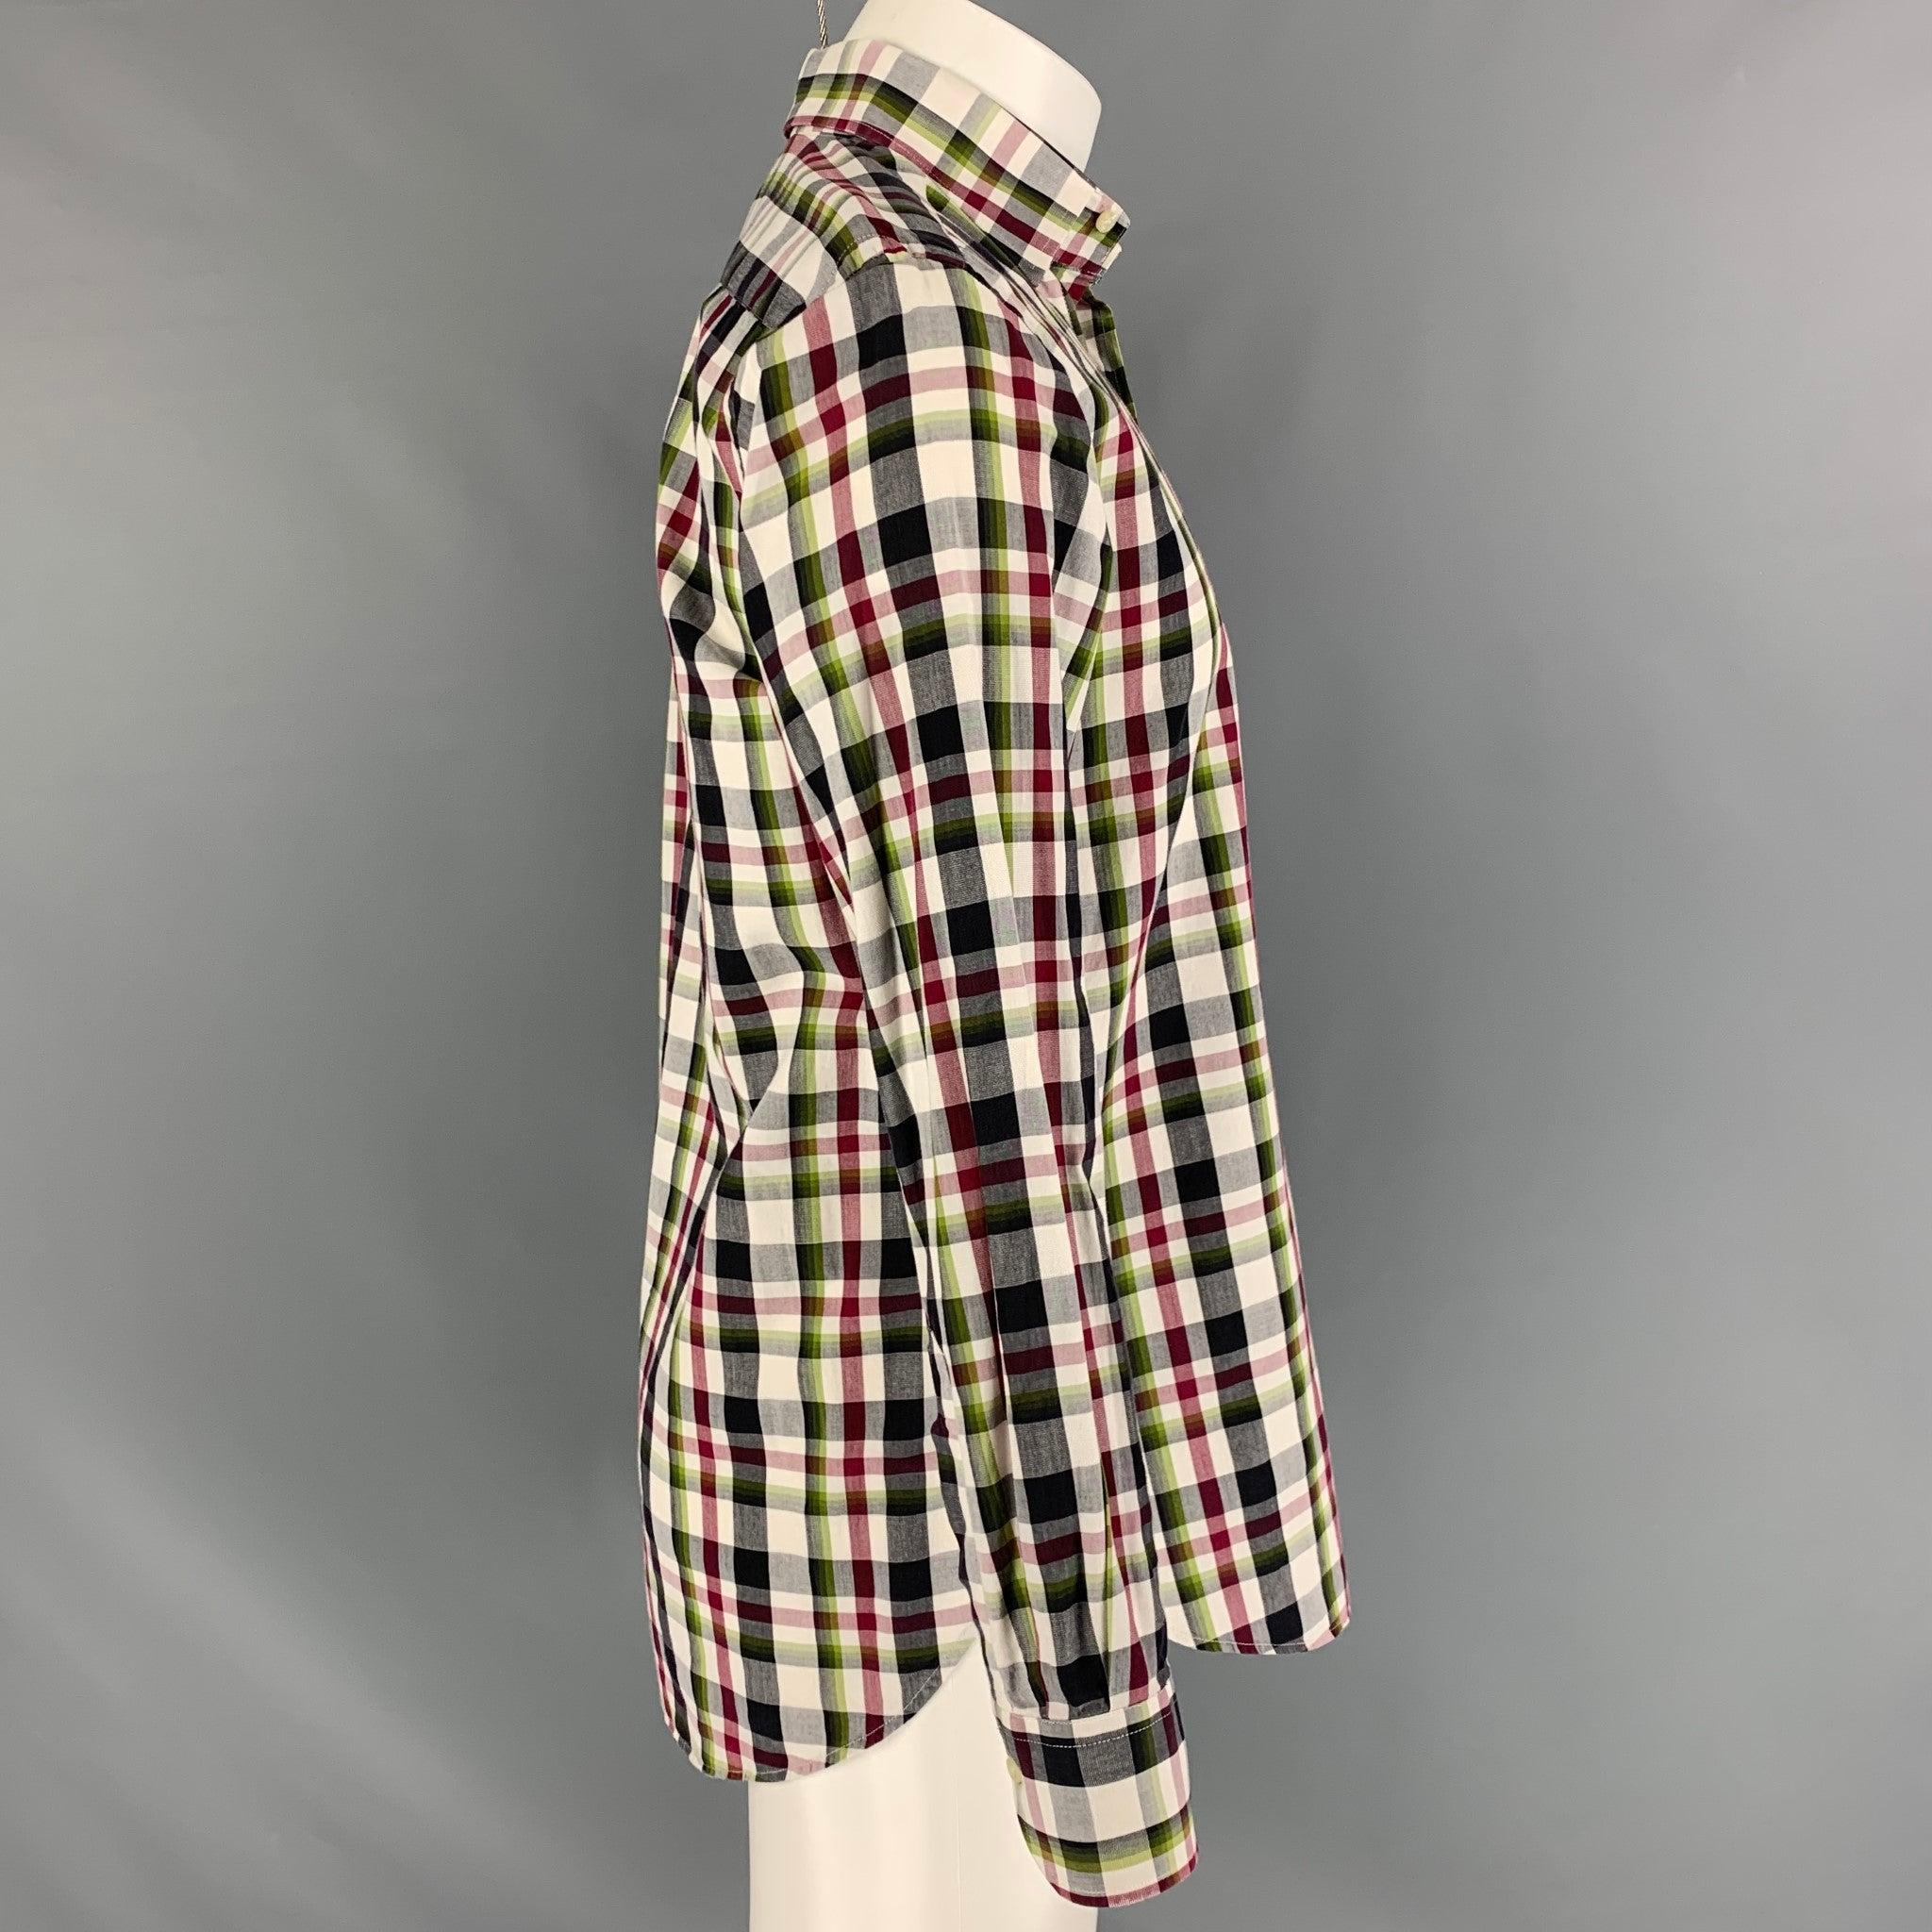 ETRO long sleeve shirt comes in a multi- colour plaid cotton featuring a button up style and a straight collar. Made in Italy.Excellent Pre-Owned Condition. 

Marked:   38 

Measurements: 
 
Shoulder: 17 inches Chest: 42 inches Sleeve: 25 inches